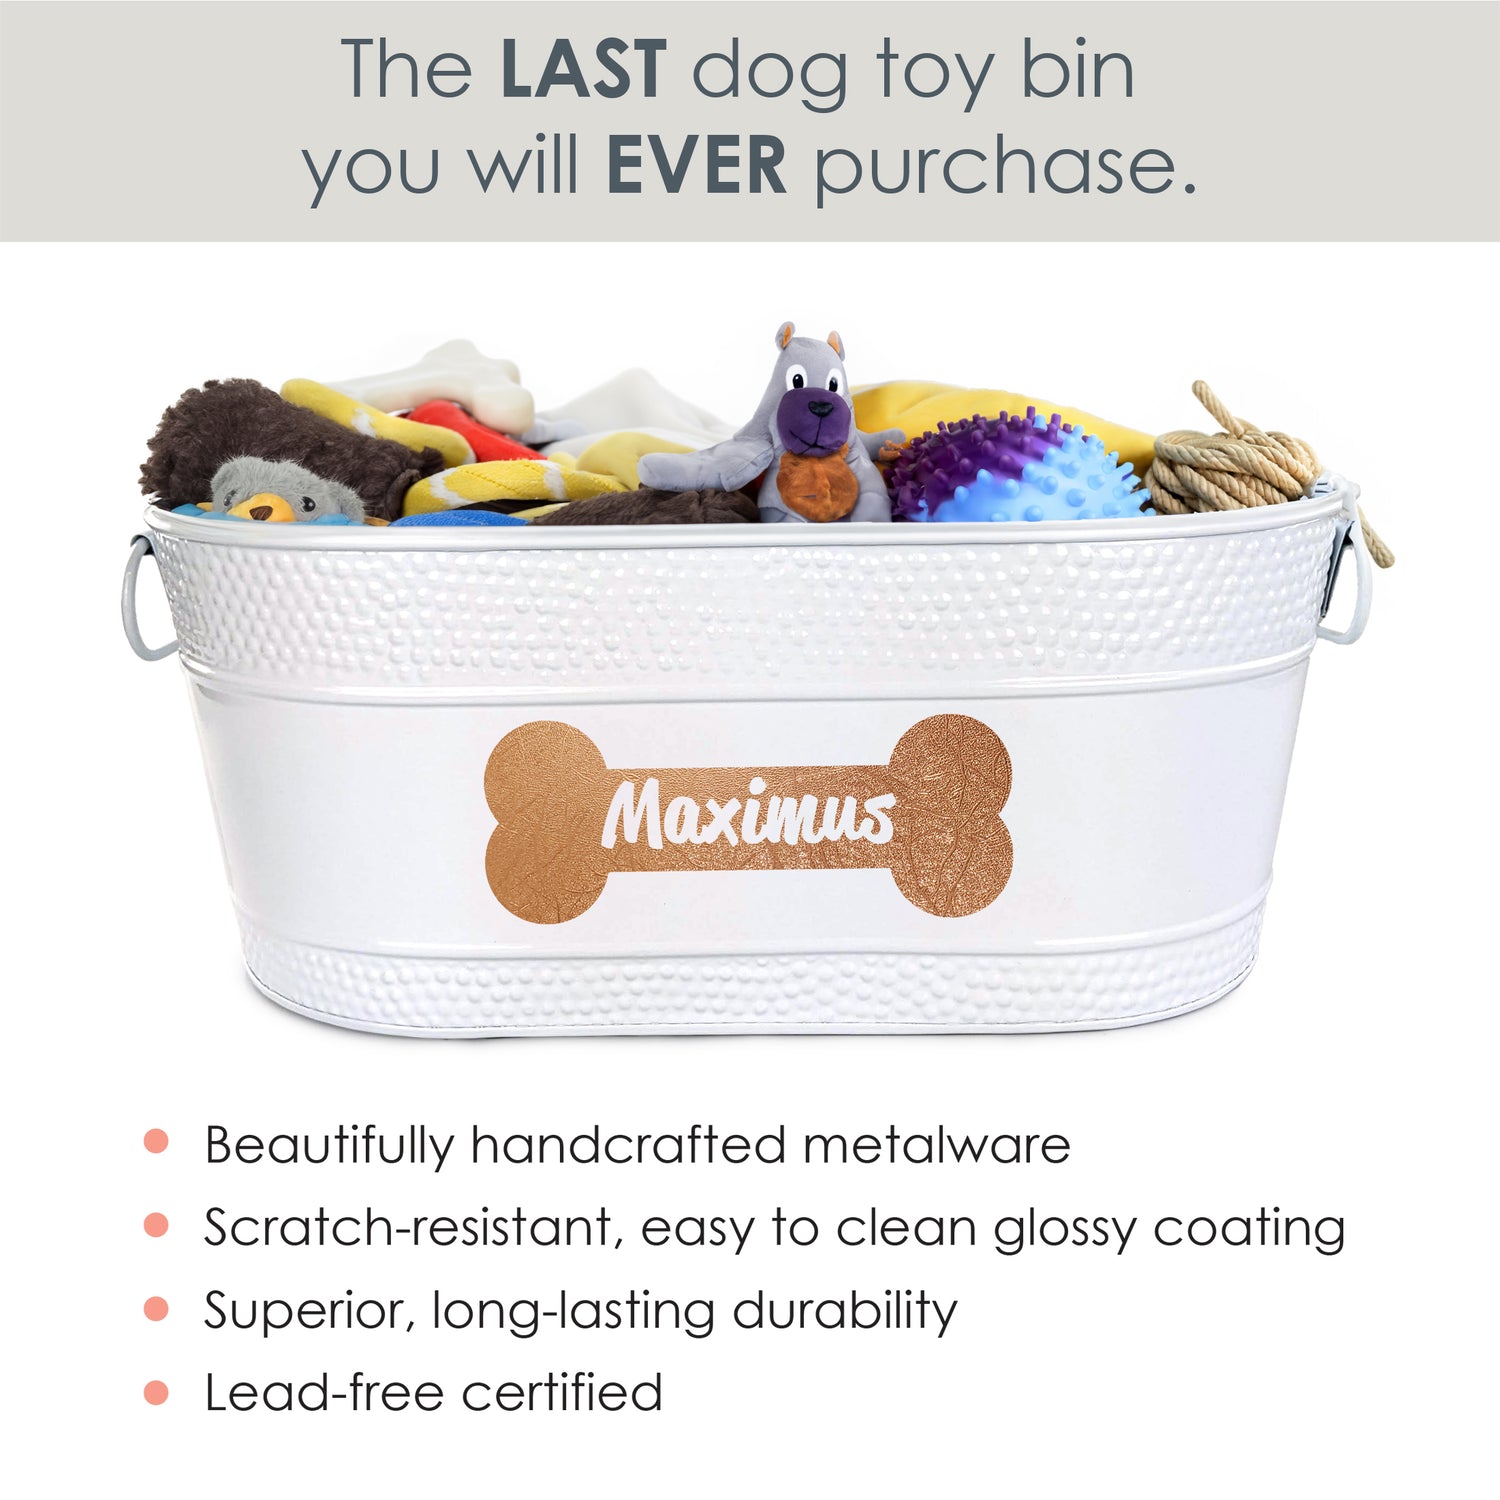 Medium long lasting durable dog bin with strength and versatility